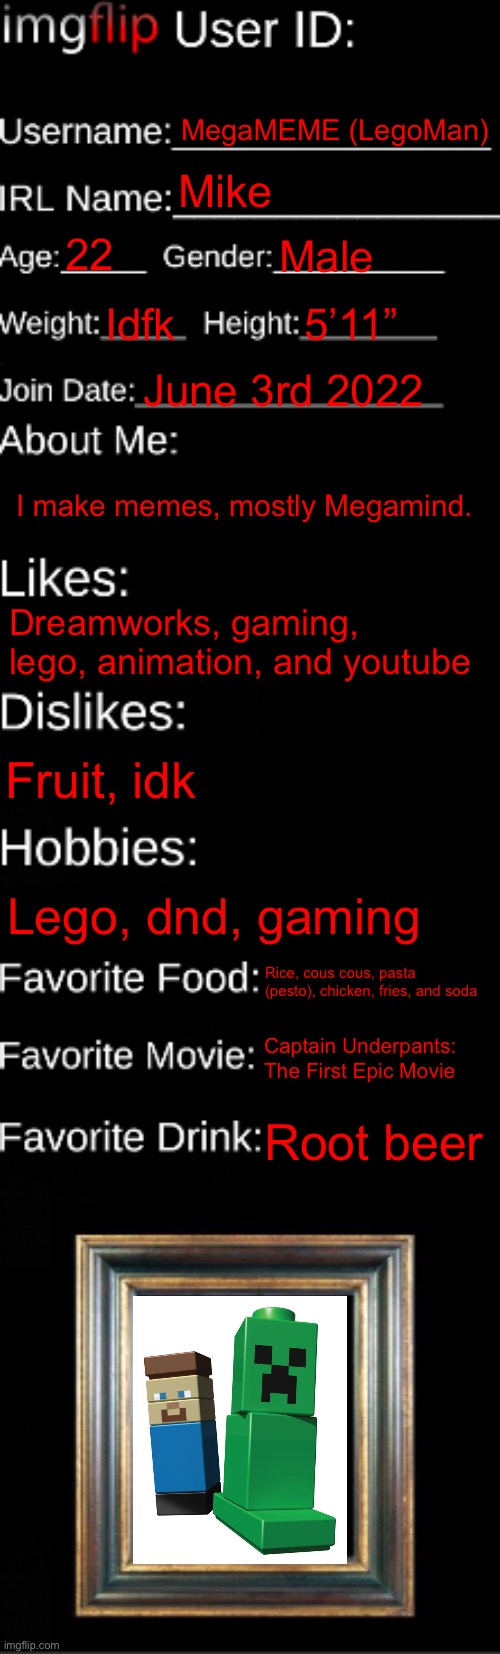 imgflip ID Card | MegaMEME (LegoMan); Mike; 22; Male; Idfk; 5’11”; June 3rd 2022; I make memes, mostly Megamind. Dreamworks, gaming, lego, animation, and youtube; Fruit, idk; Lego, dnd, gaming; Rice, cous cous, pasta (pesto), chicken, fries, and soda; Captain Underpants: The First Epic Movie; Root beer | image tagged in imgflip id card | made w/ Imgflip meme maker